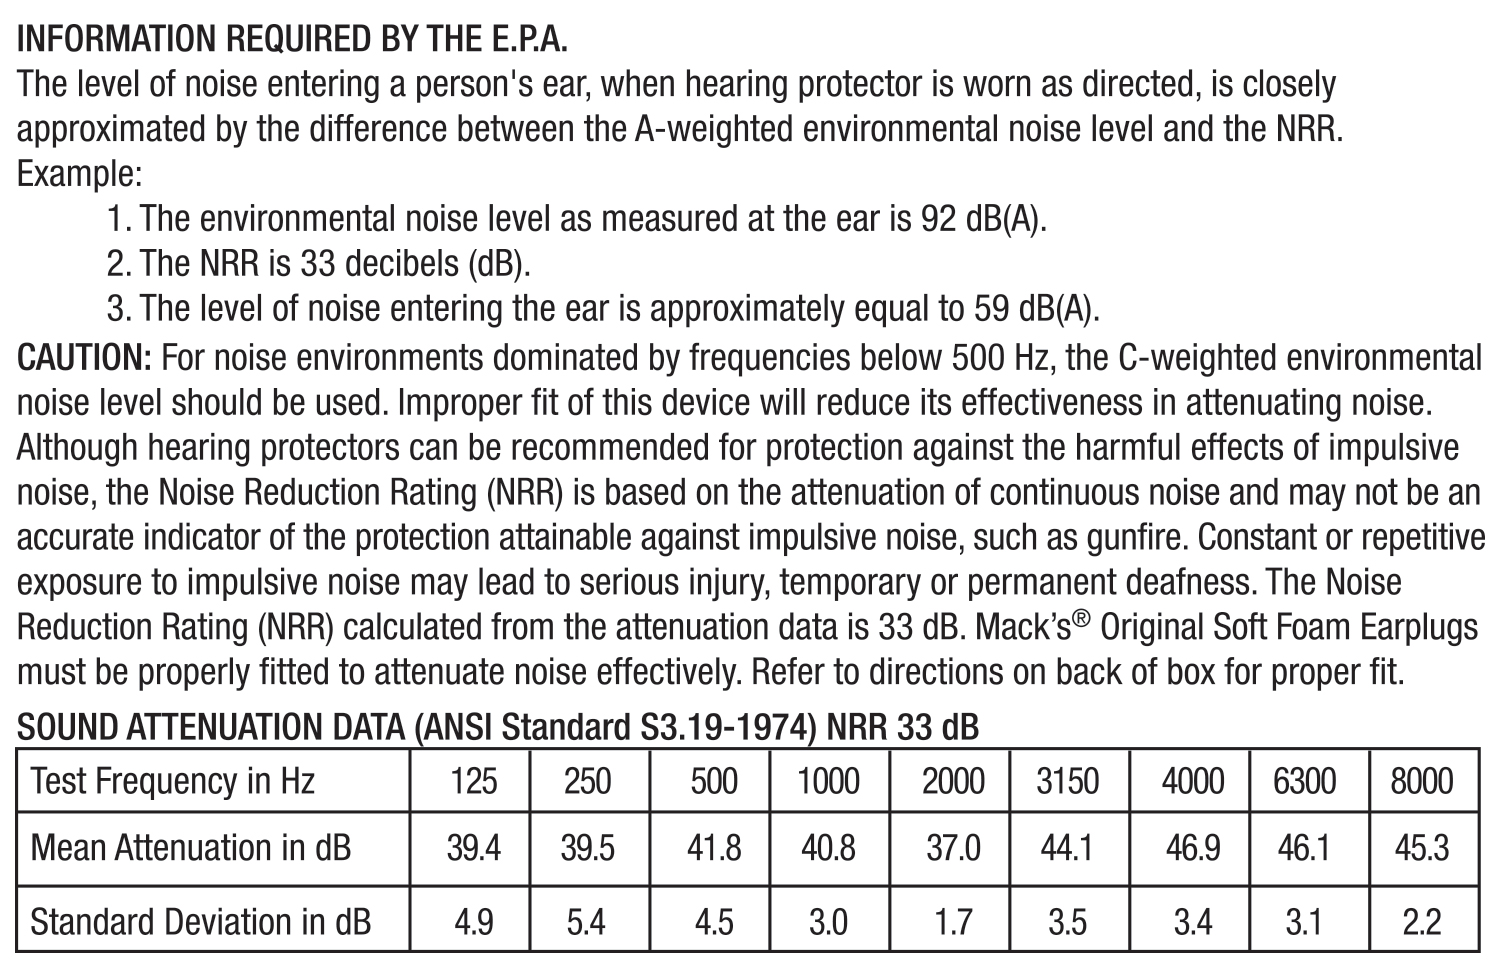 Noise Reduction Information Document